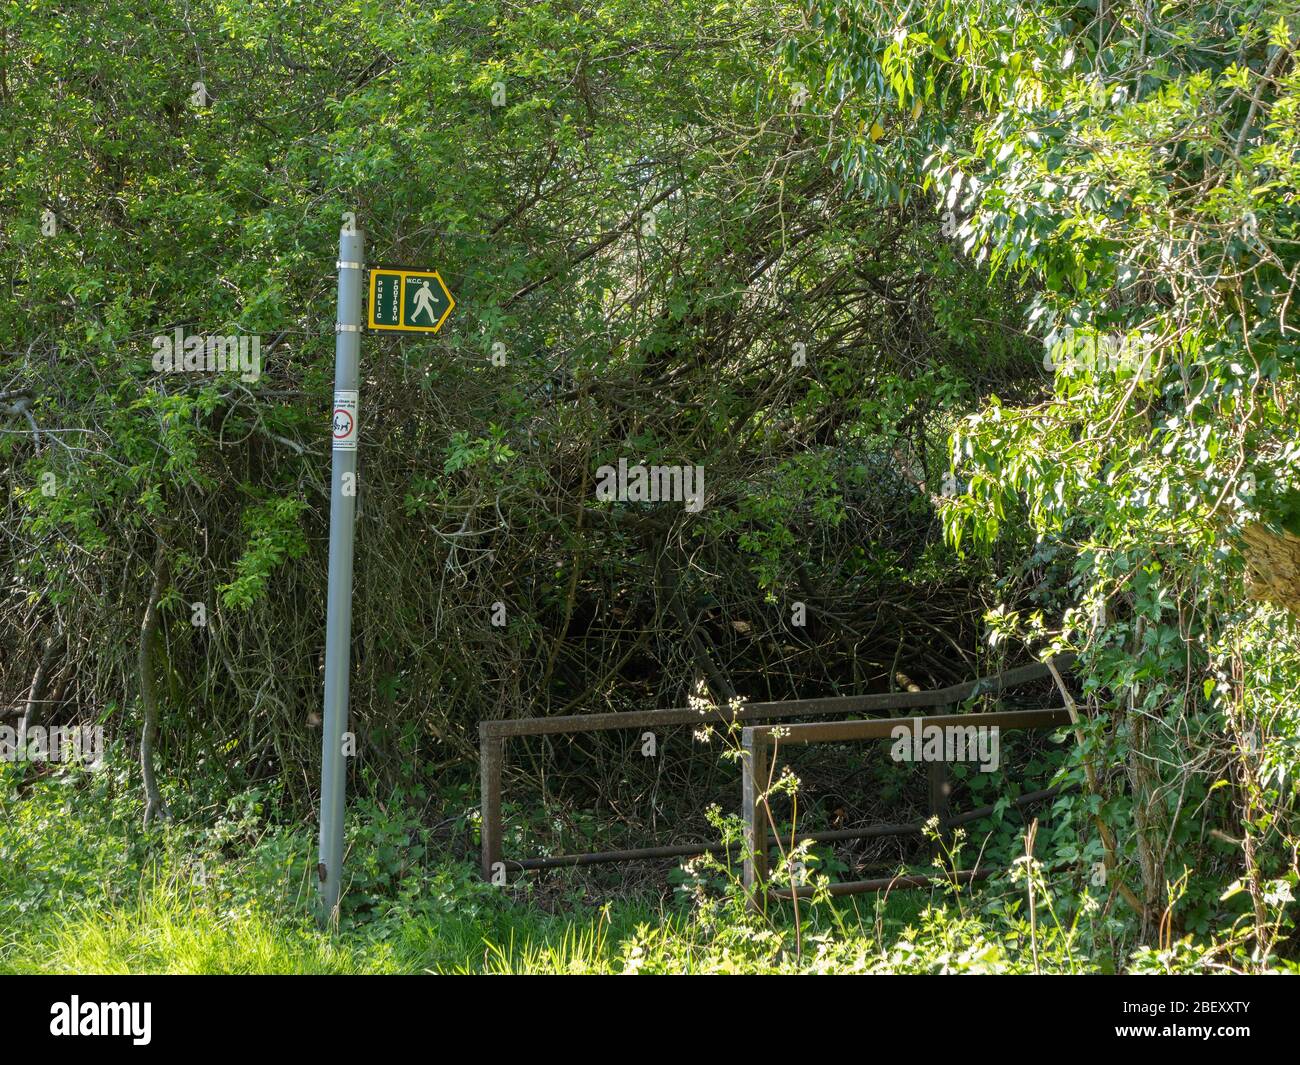 A public footpath sign pointing the way across a small bridge in Westbury, Wiltshire, UK. Stock Photo